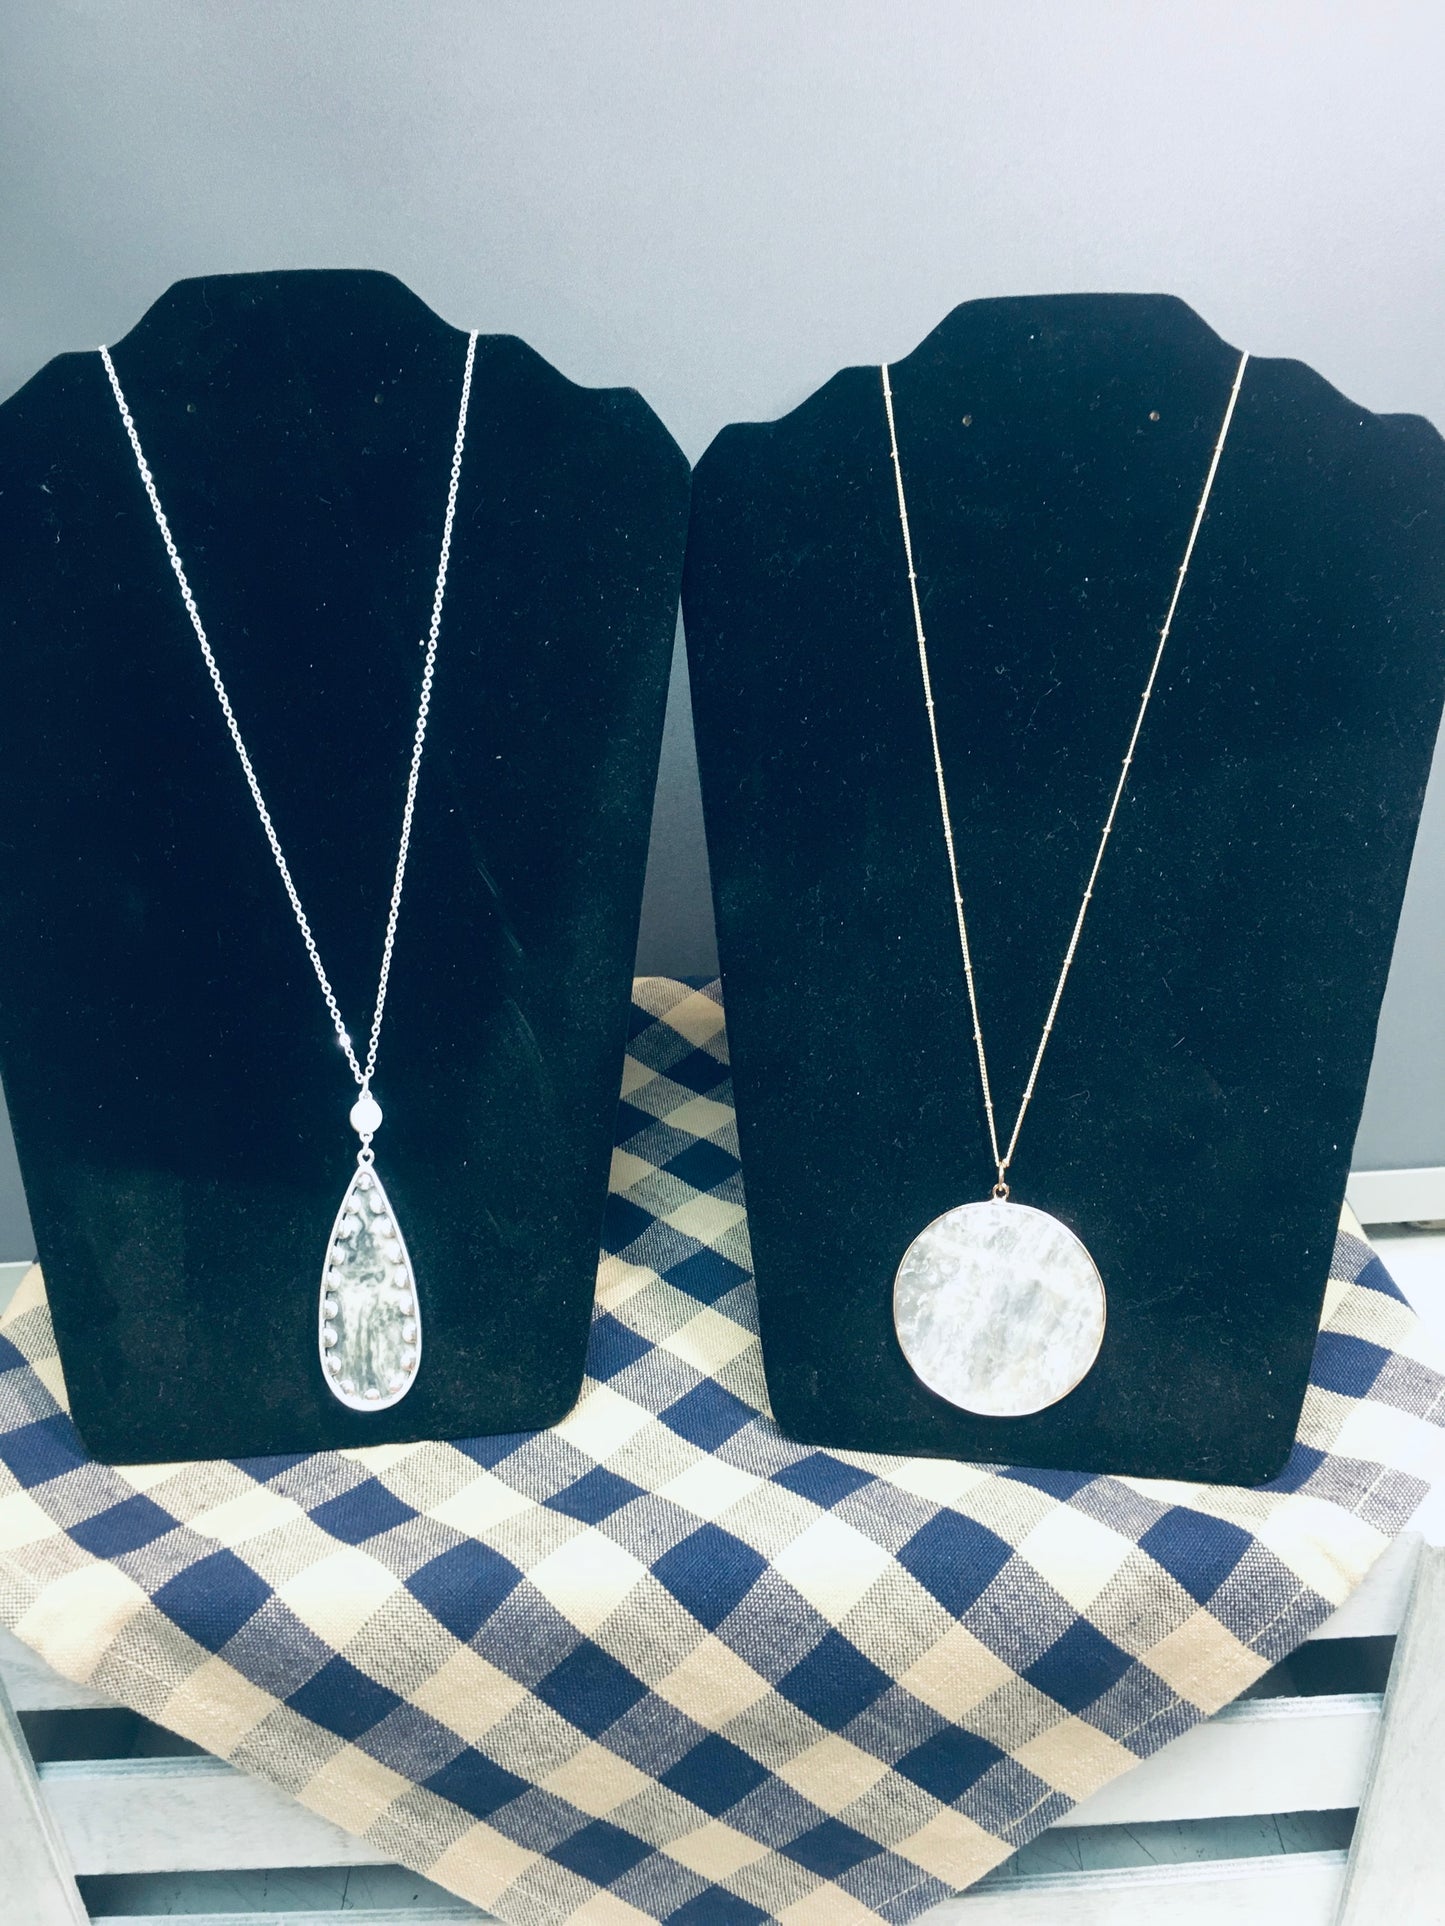 Marble necklaces